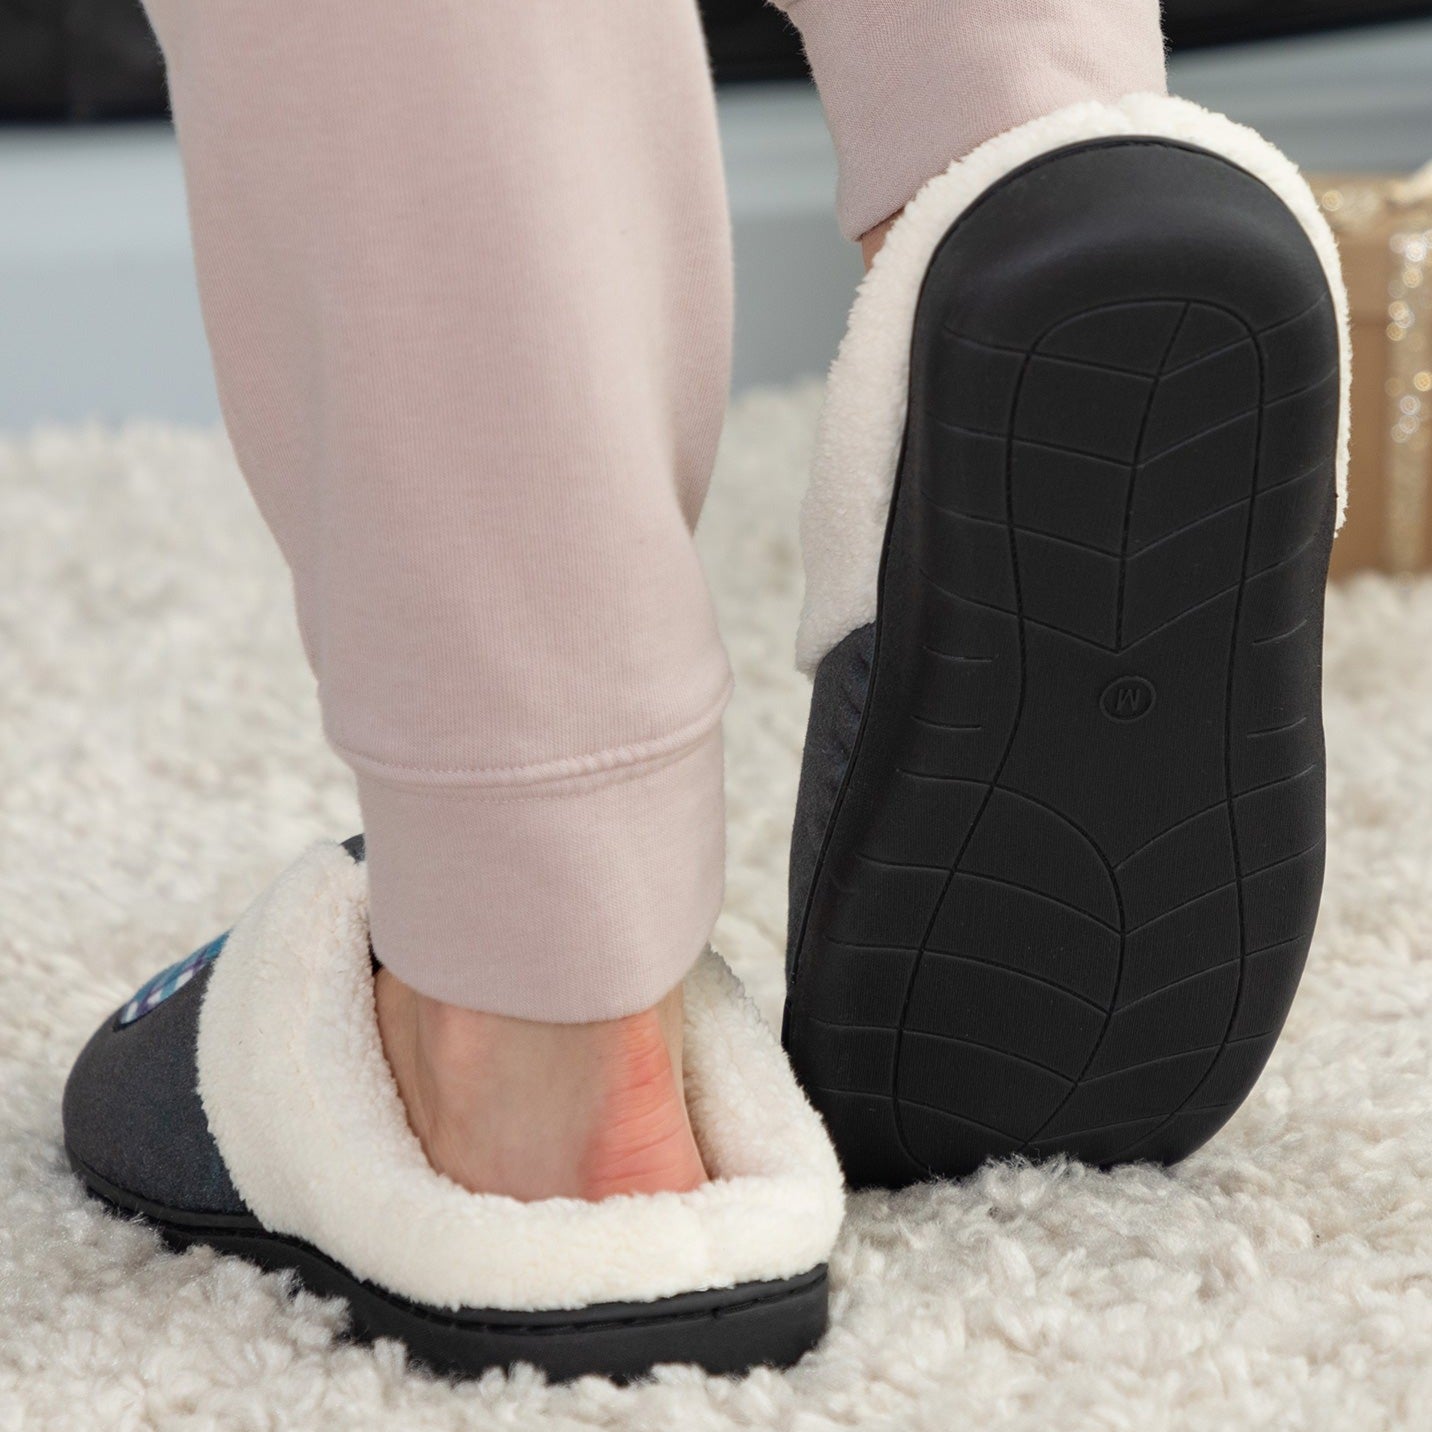 Pet Patch Slide Slippers